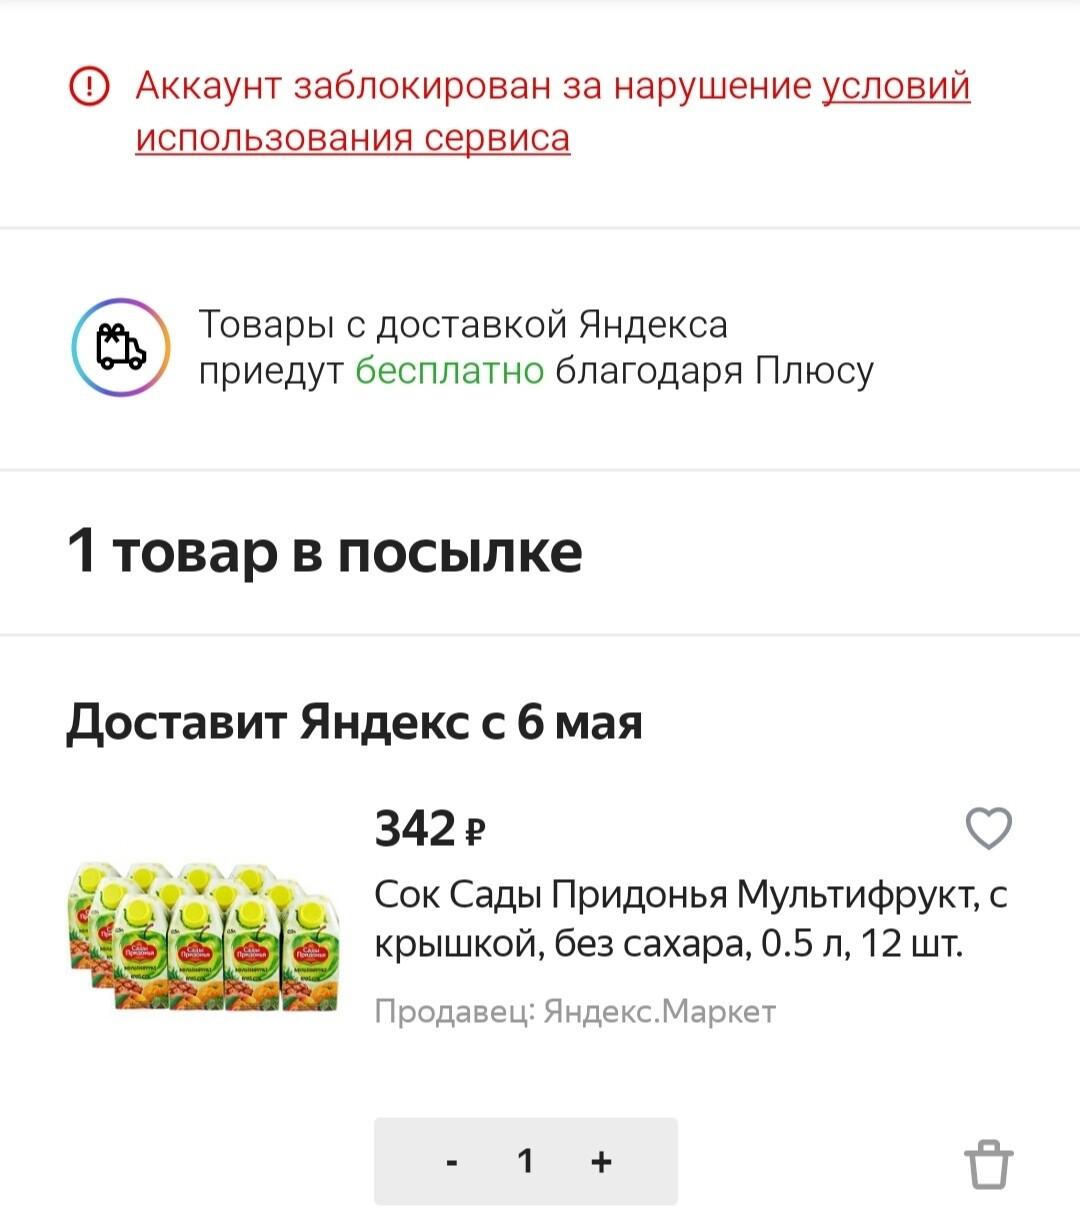 My Yandex.Market account with a plus and points blocked - according to support, unlocking is impossible